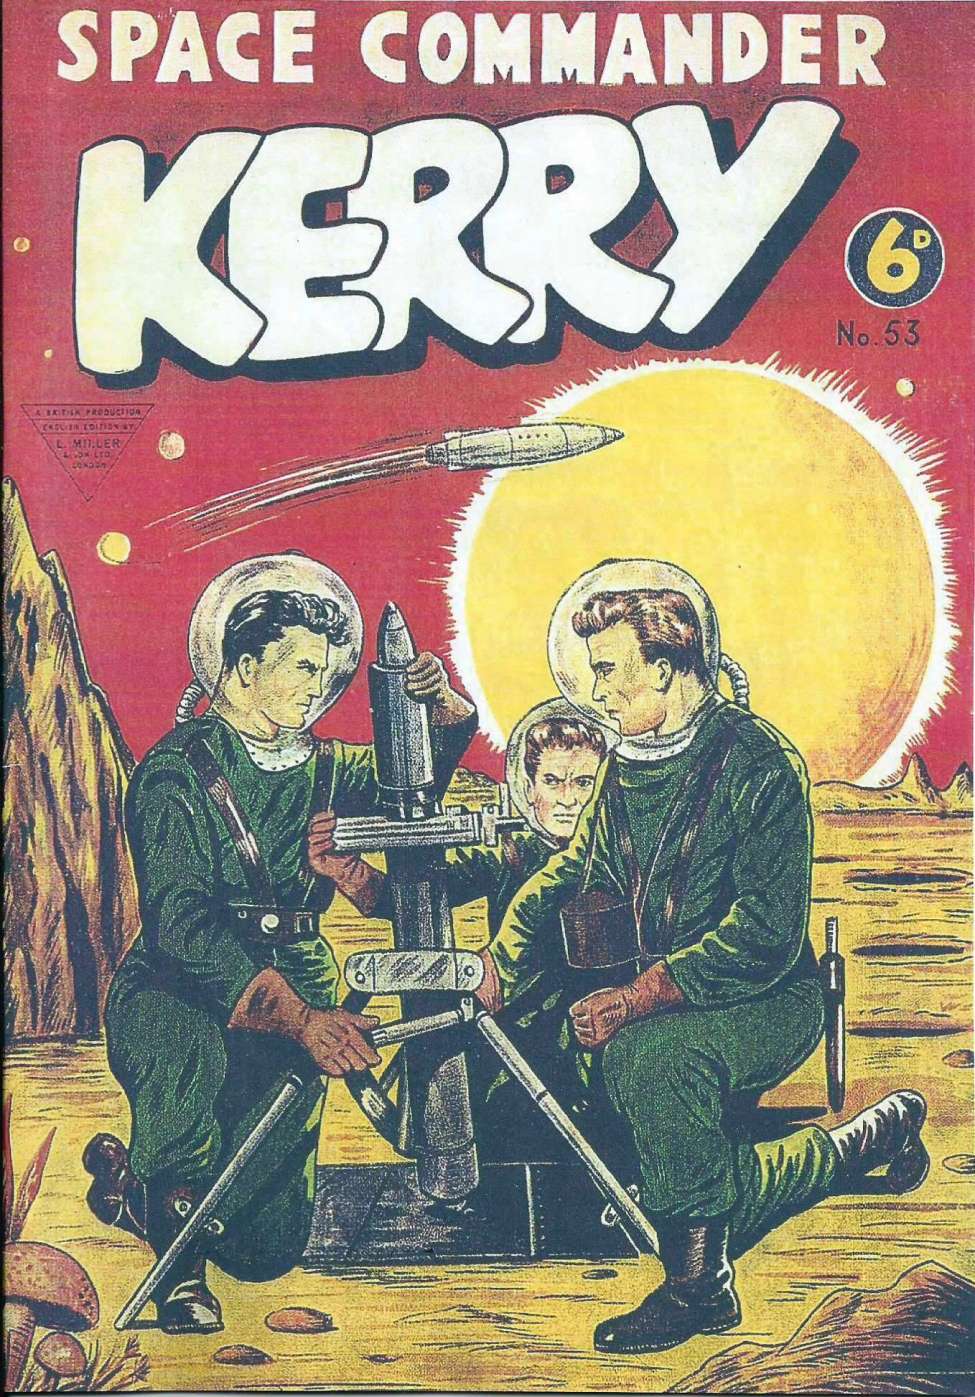 Book Cover For Space Commander Kerry 53